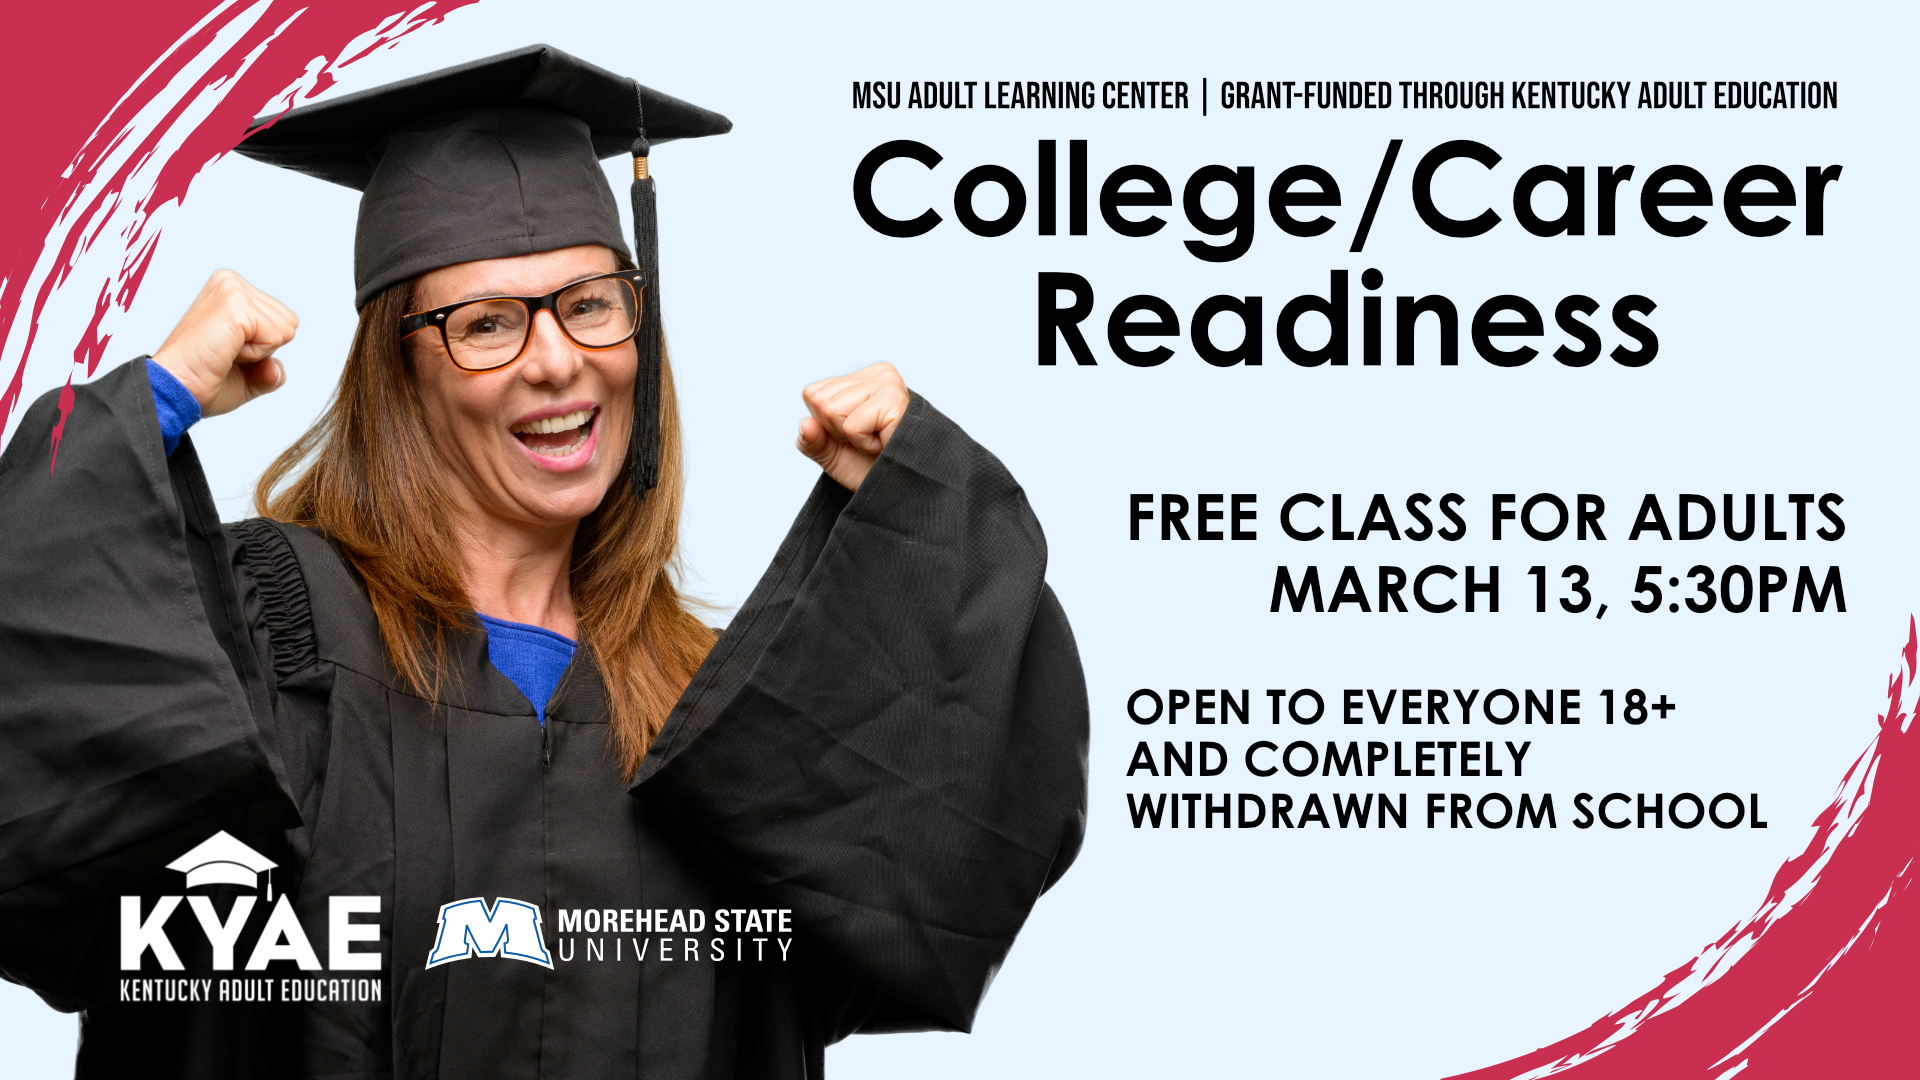 College and Career Readiness, March 13th at 5:30pm, intended for everyone 18+ and withdrawn from school